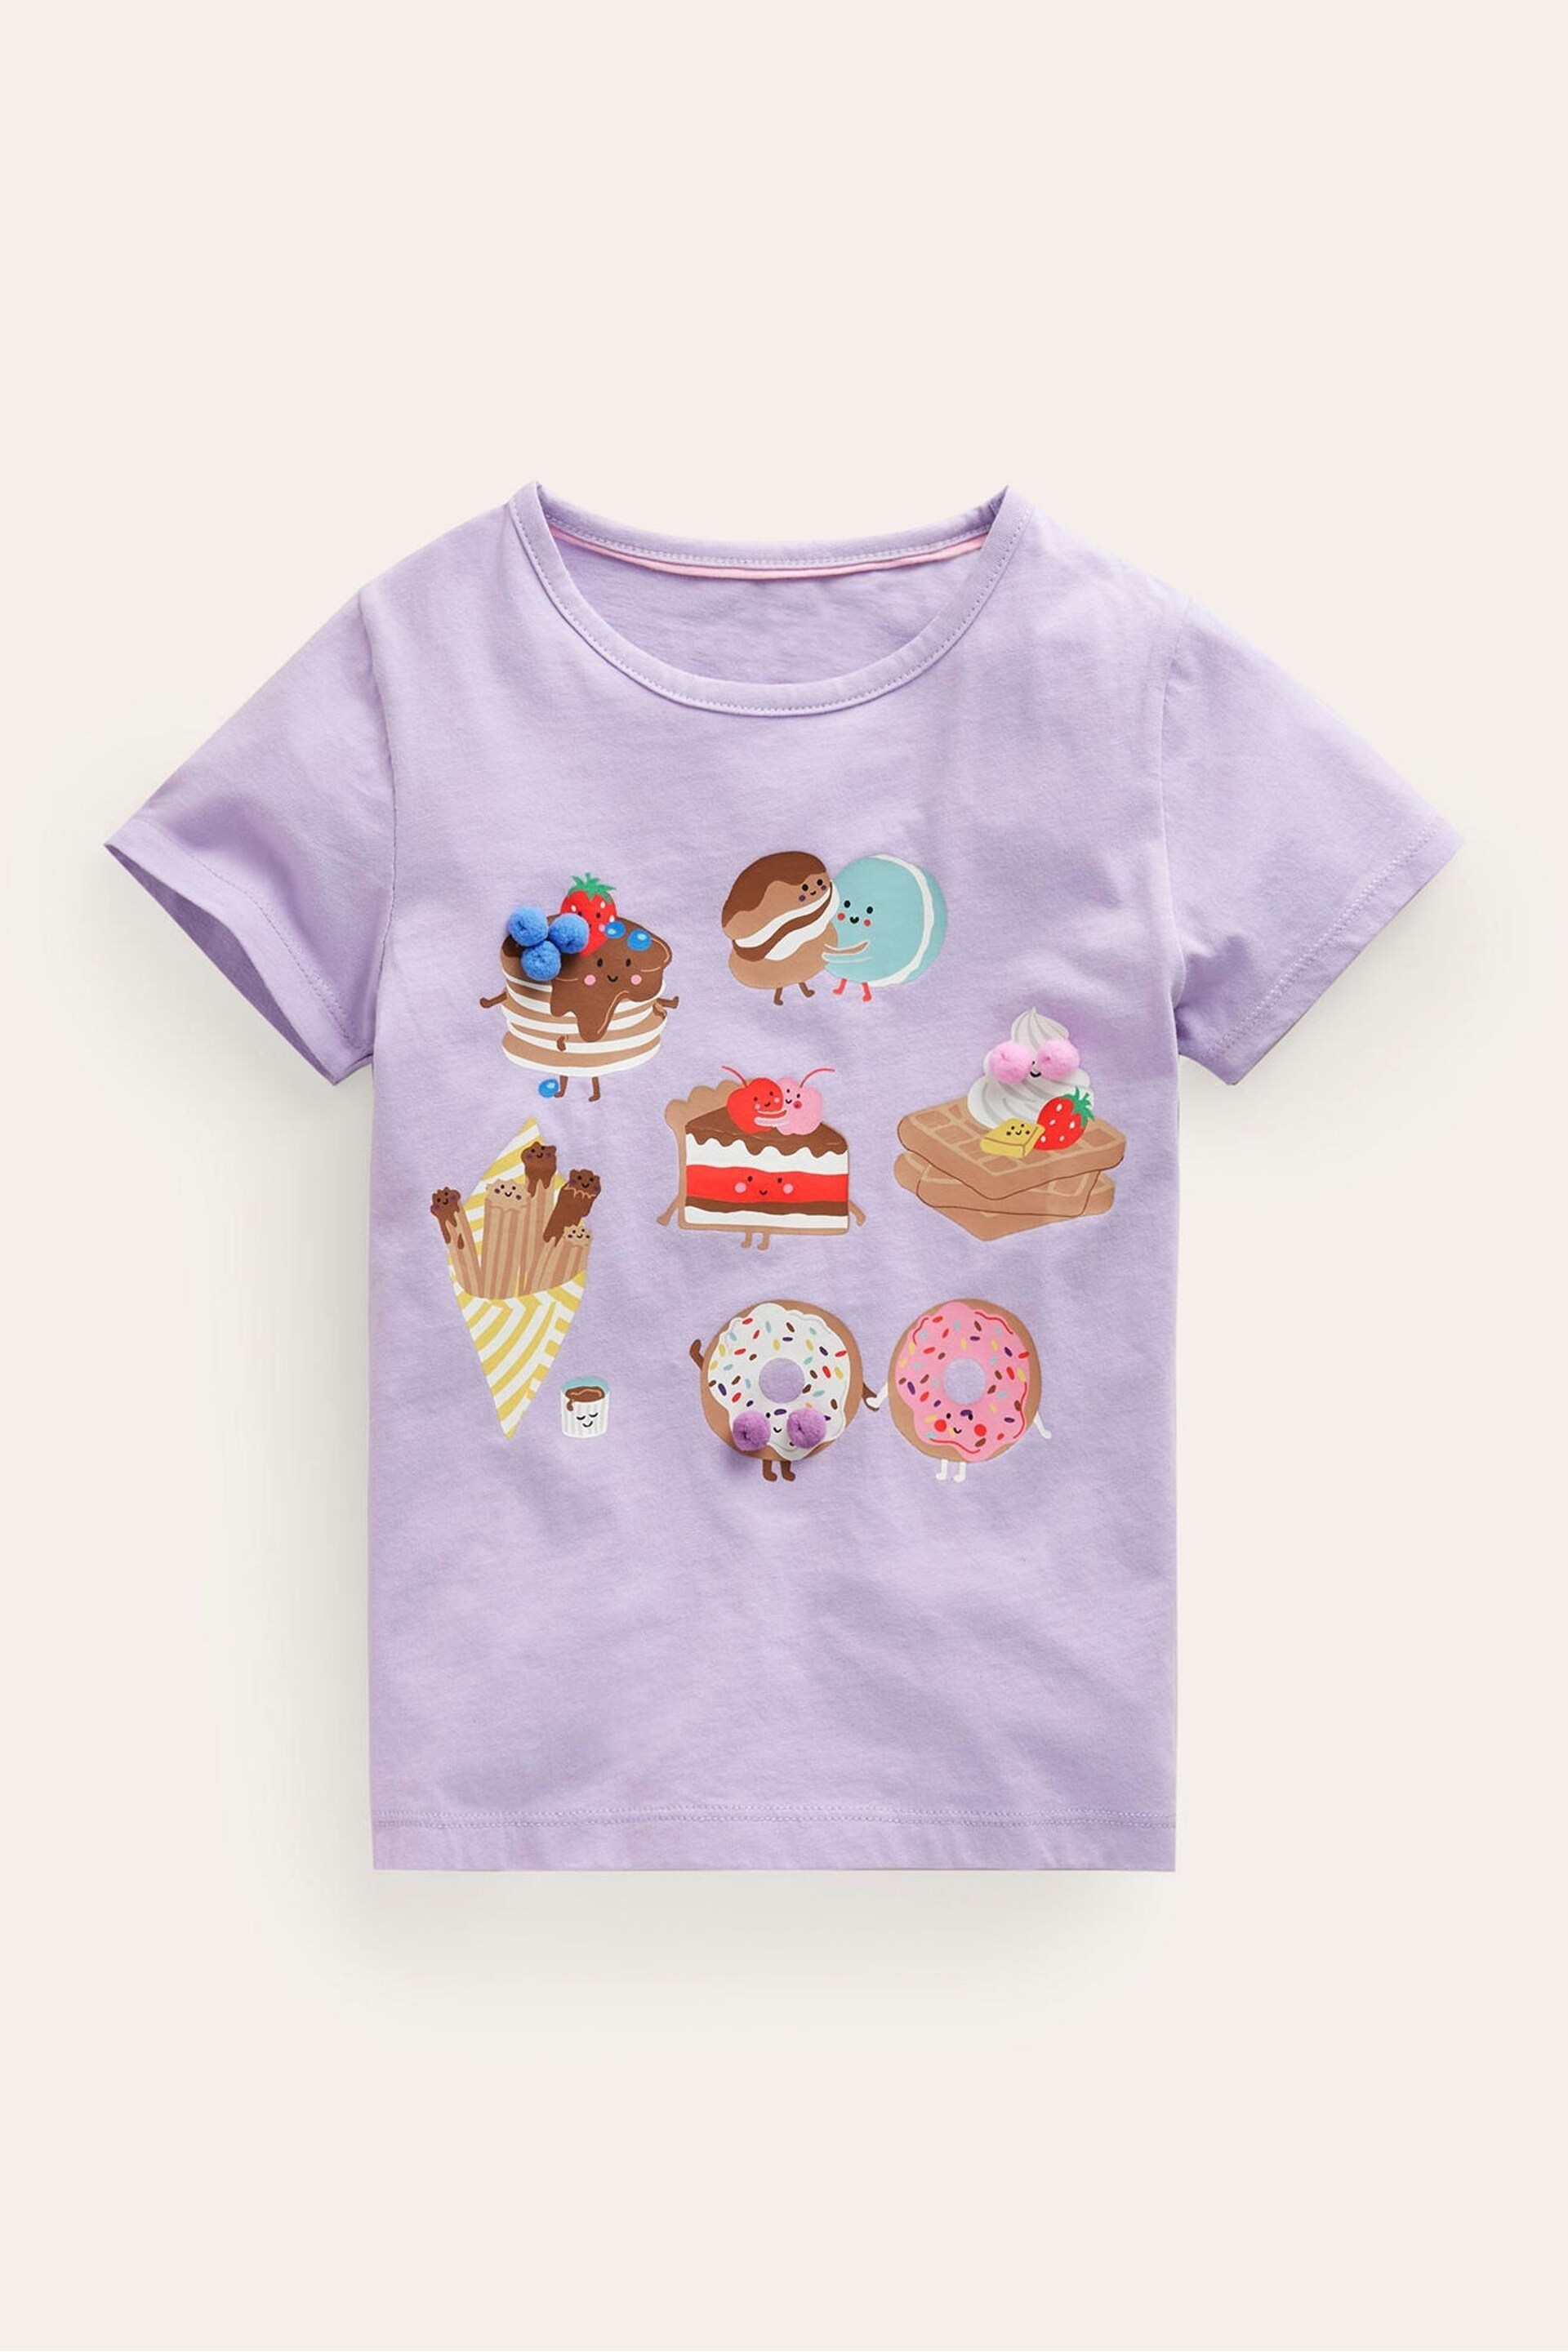 Boden Purple Printed Graphic T-Shirt - Image 1 of 3